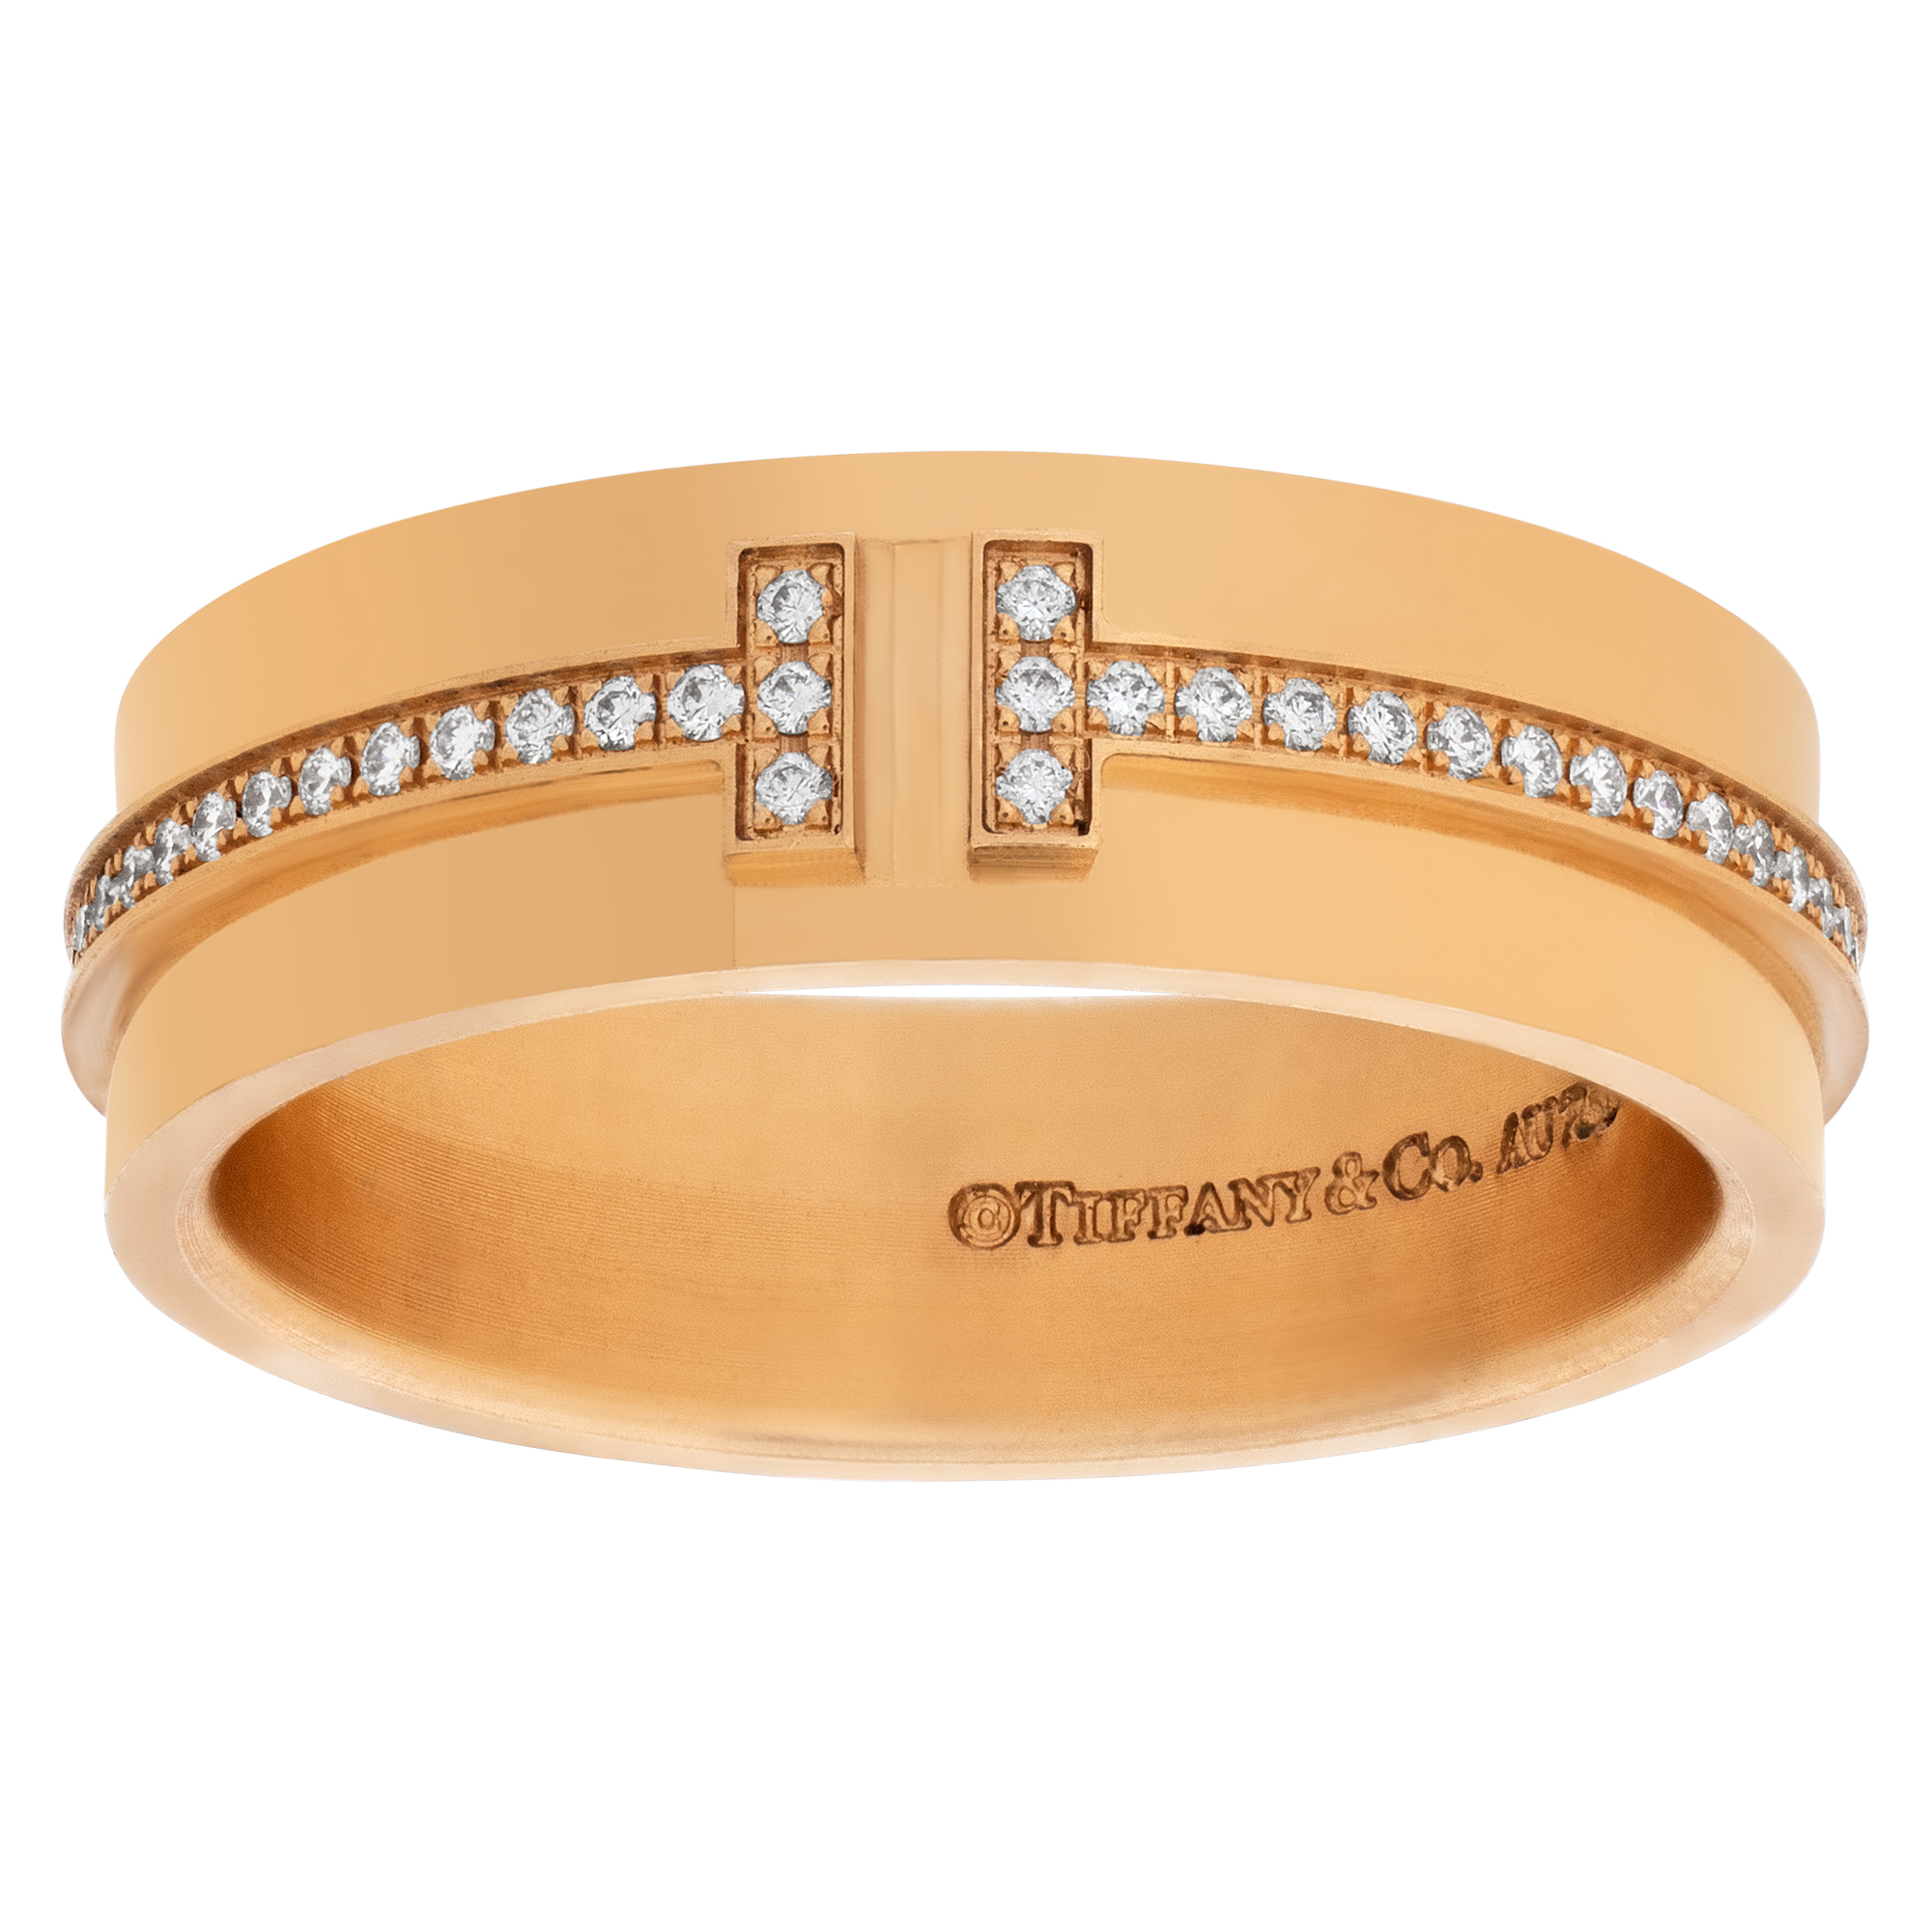 Wide "T" band ring with diamonds set in 18k rose gold